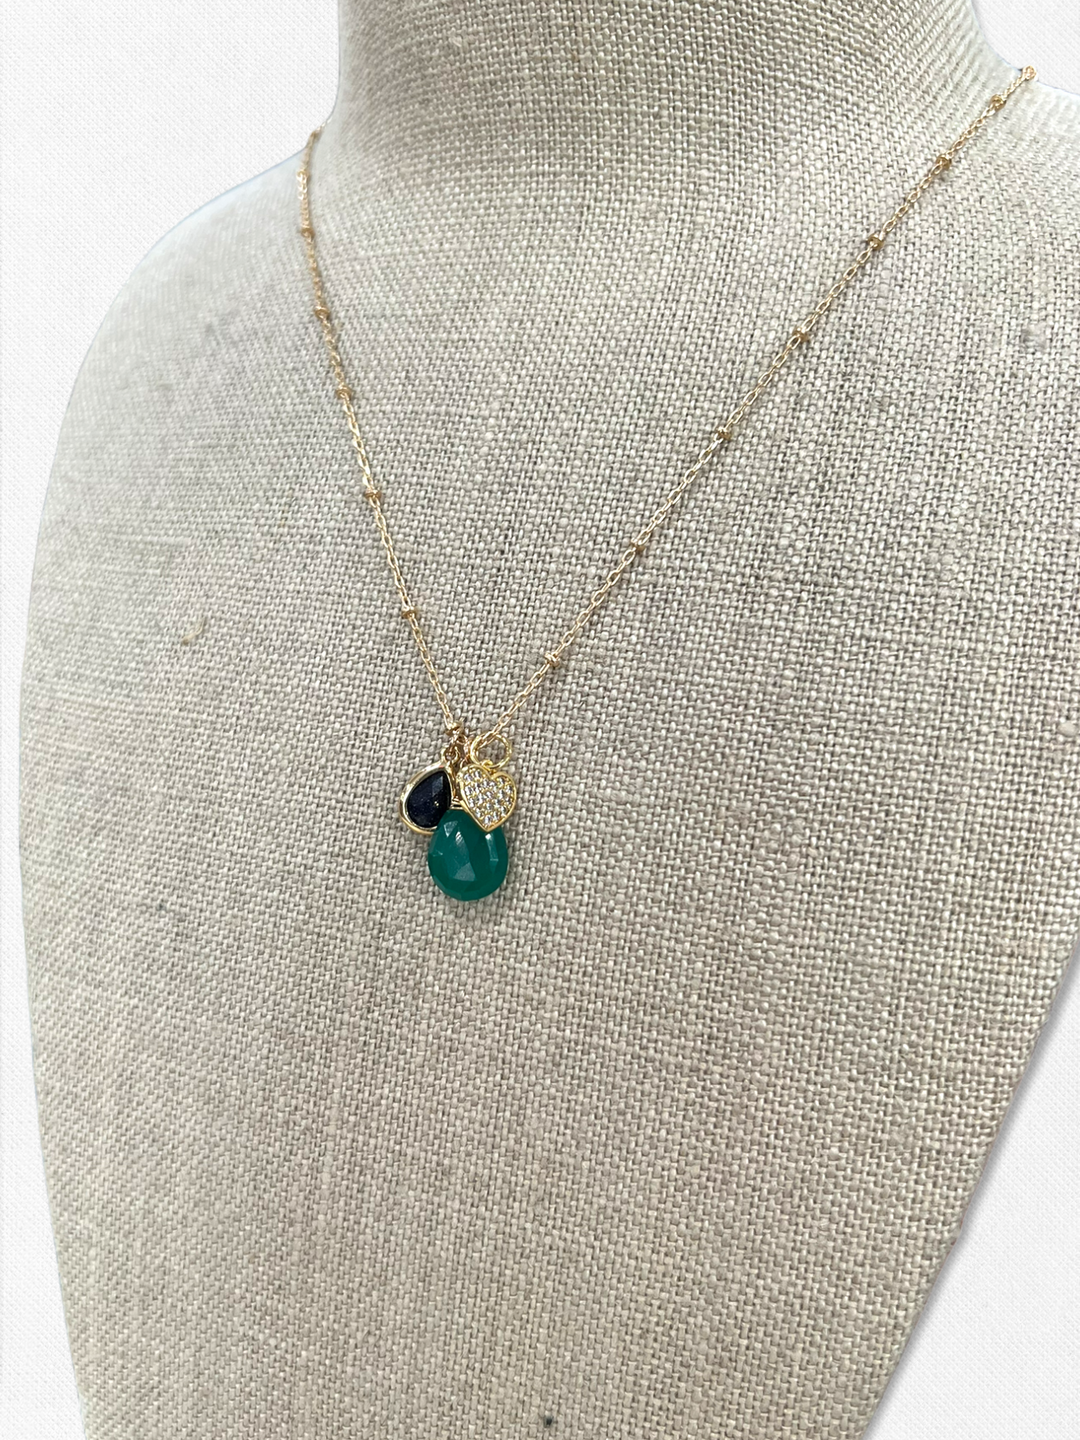 GREEN AGATE PENDANT MIX CHARM NECKLACE - Kingfisher Road - Online Boutique